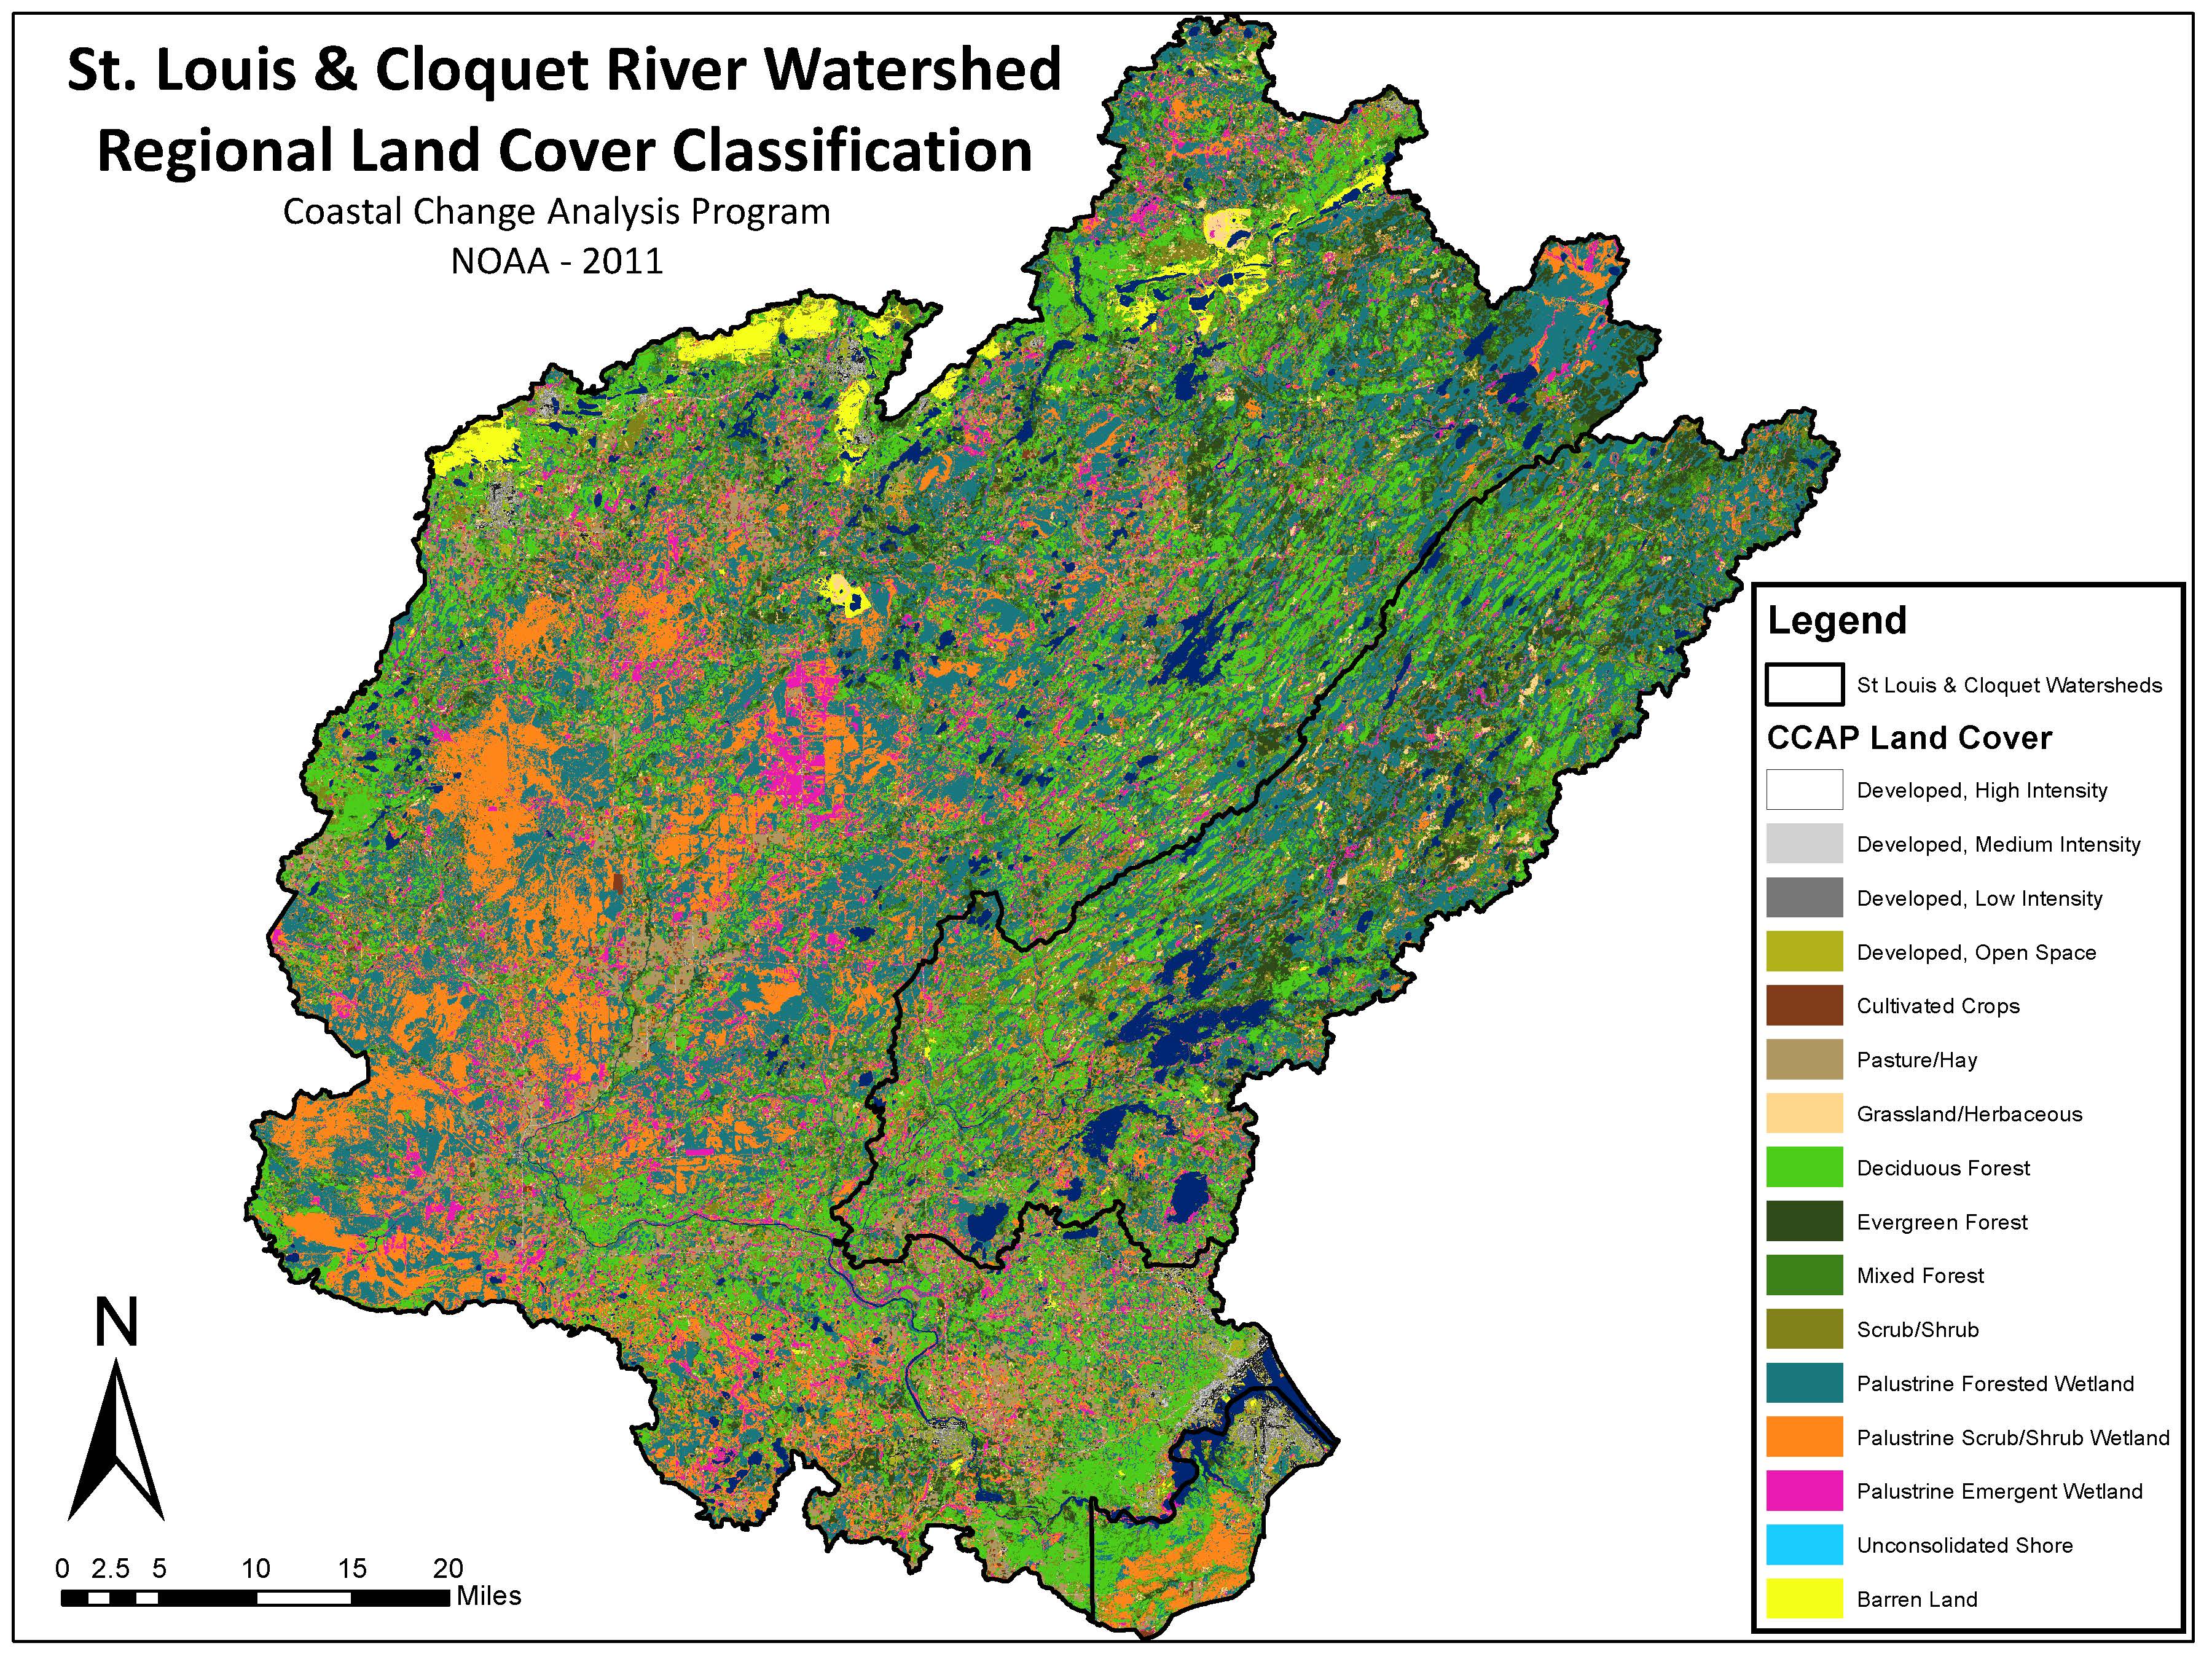 C-CAP Land Cover Atlas provides data for the St. Louis and Cloquet River Watersheds